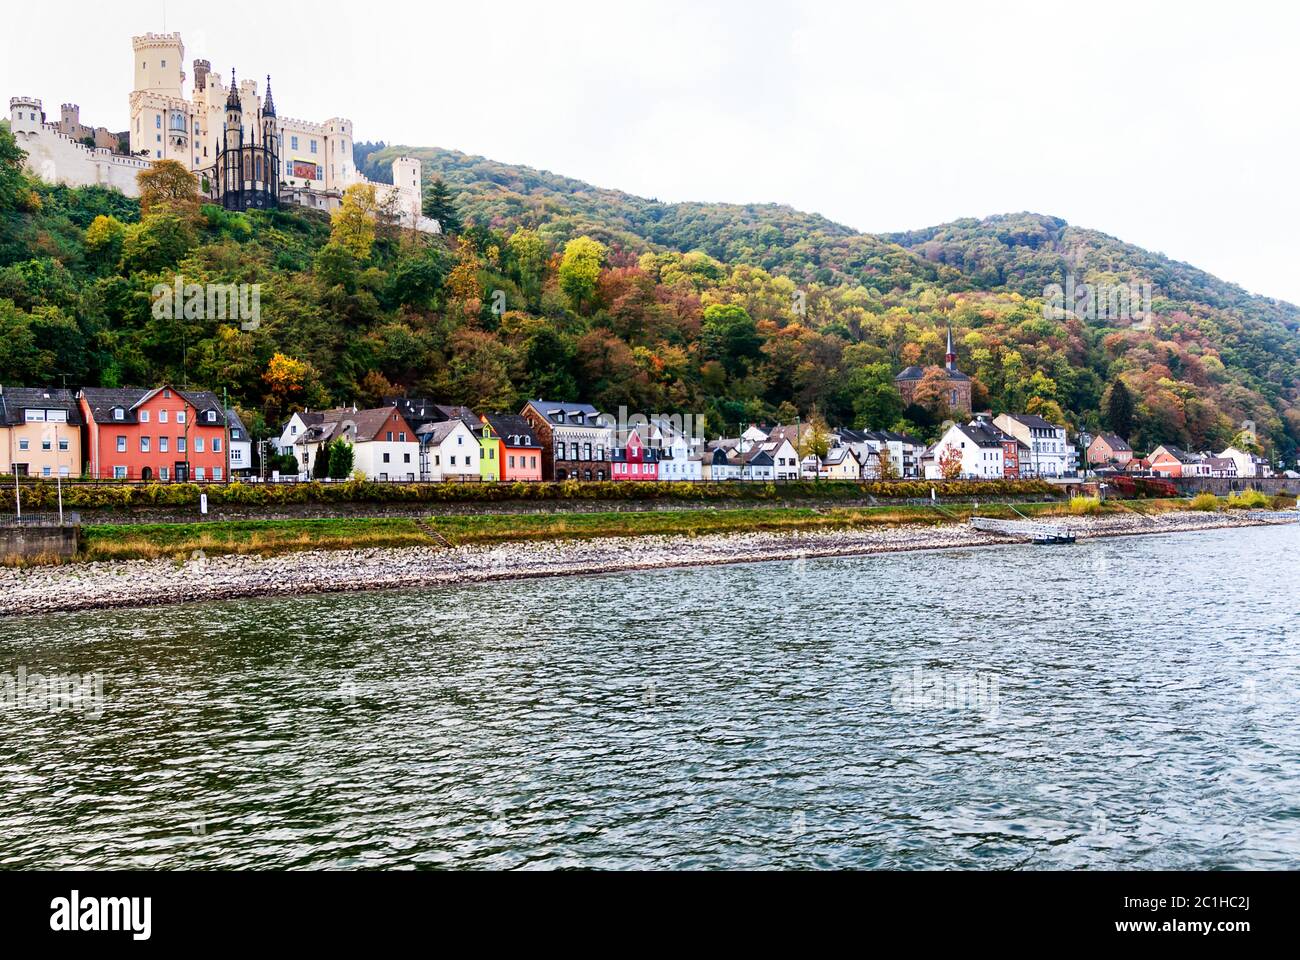 A long row of picturesque houses on the Rhine shore beneath the castle Stolzenfels in historic city Koblenz, Germany Stock Photo